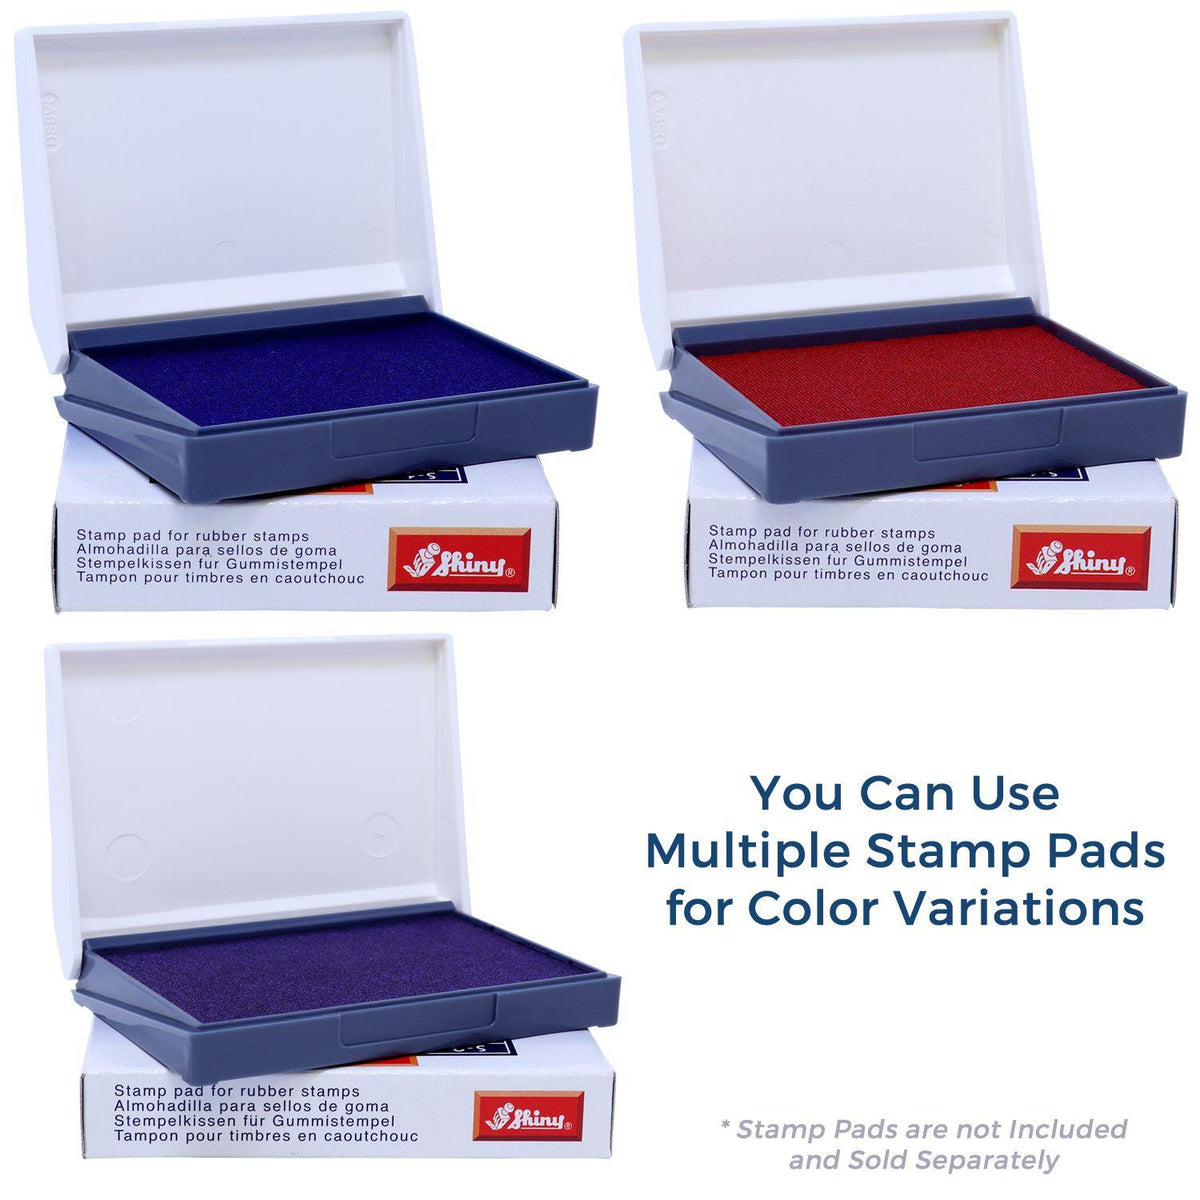 Stamp Pads for Distributed With Blank Line Rubber Stamp Available